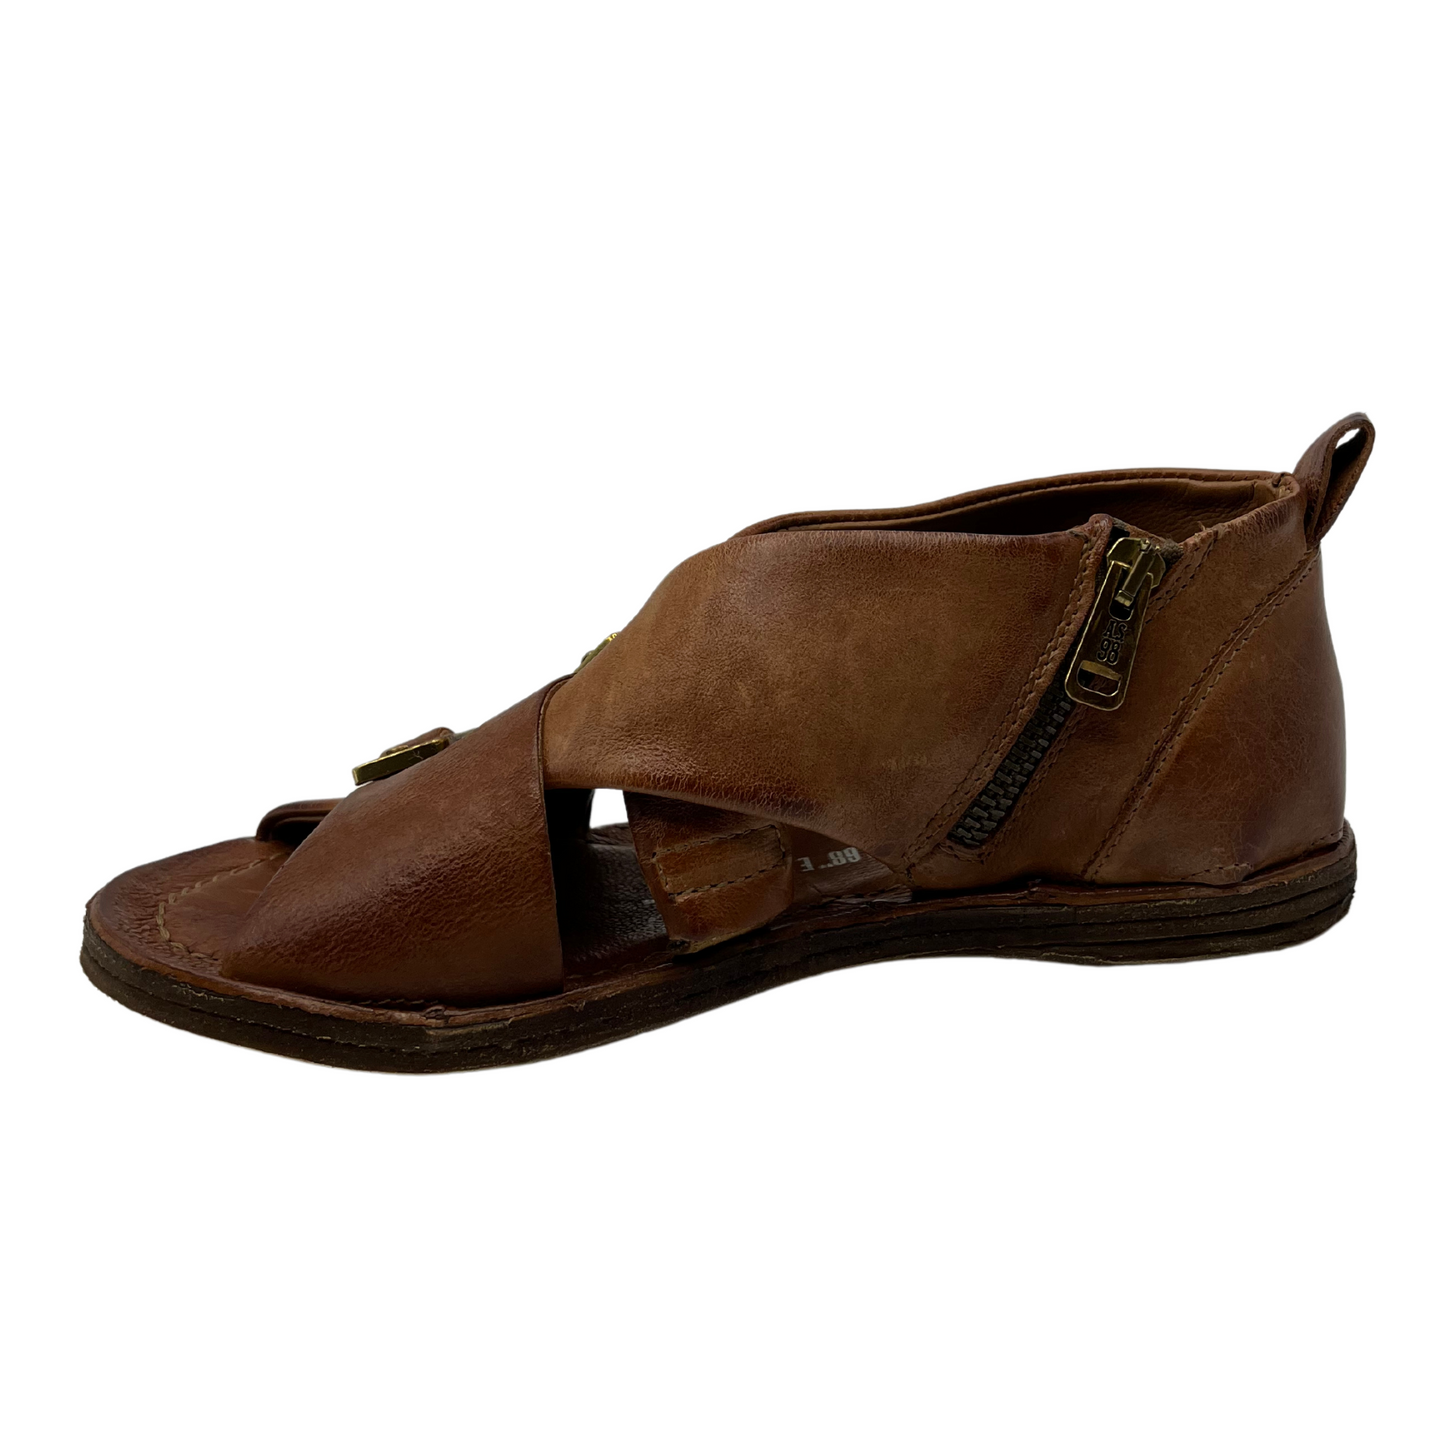 Left facing view of brown leather shoe with brass side zipper 